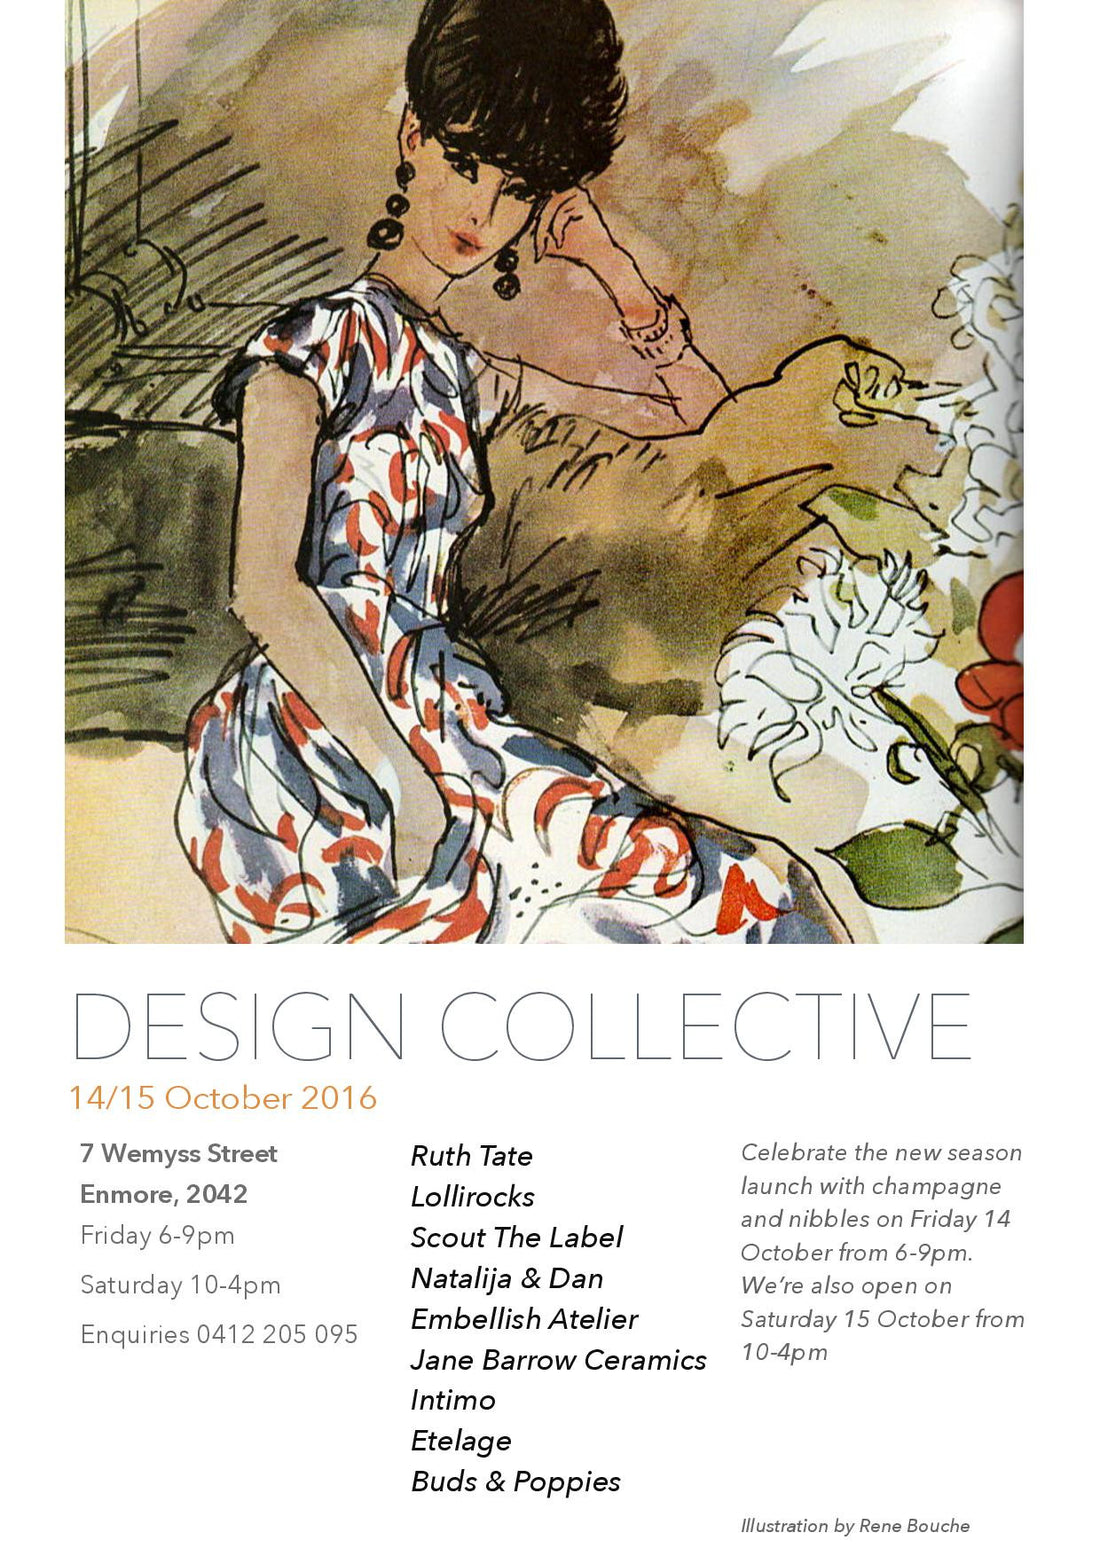 Invitation to Spring/Summer Design Collective 14/15 October 2016